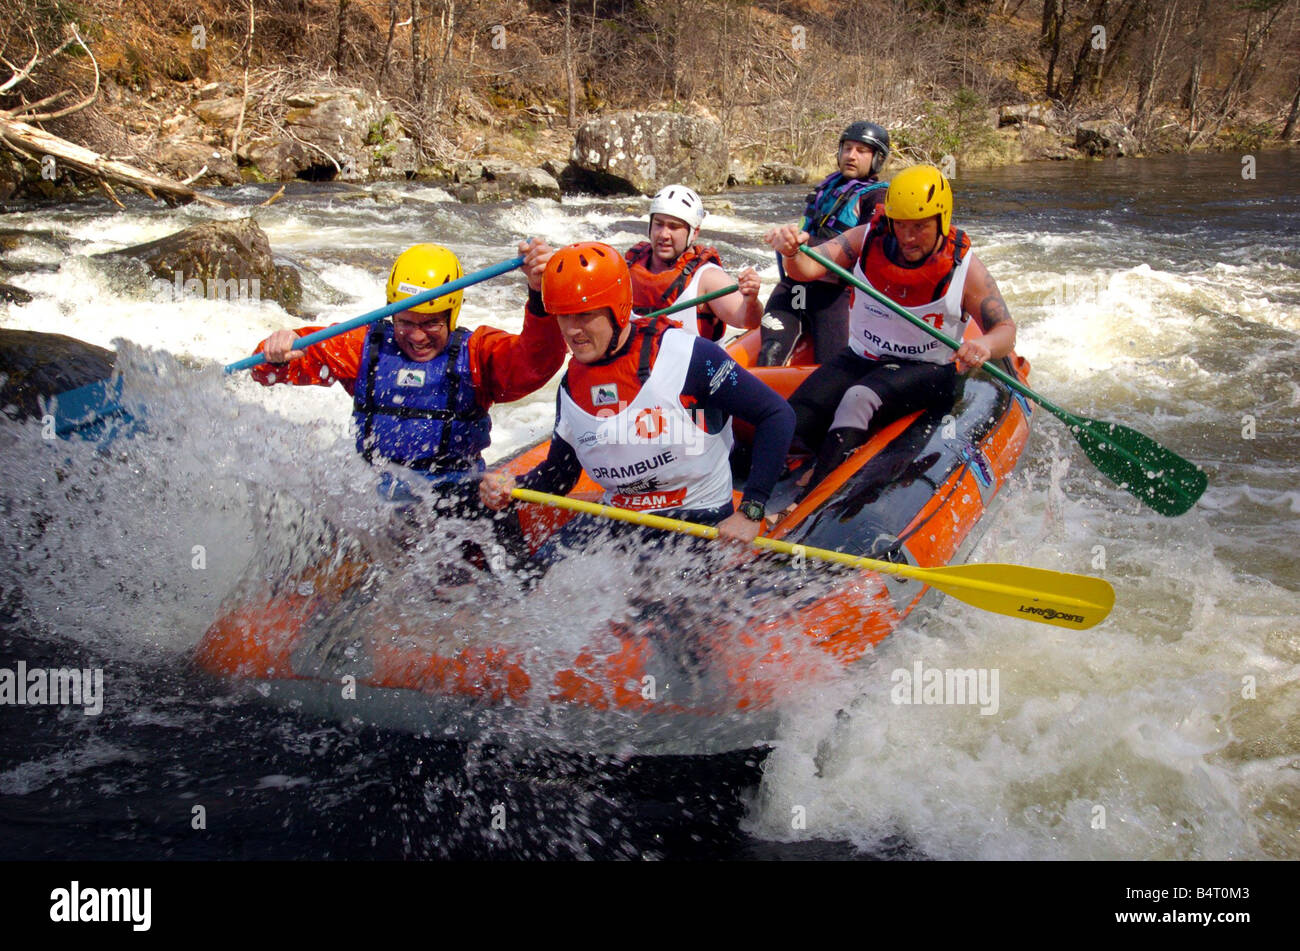 Team America James Moncur Centre Mike Watts John Richardson and James Ballard seen here taking part in the white water rafting section of The Drambuie Pursuit Adventure Race Stock Photo